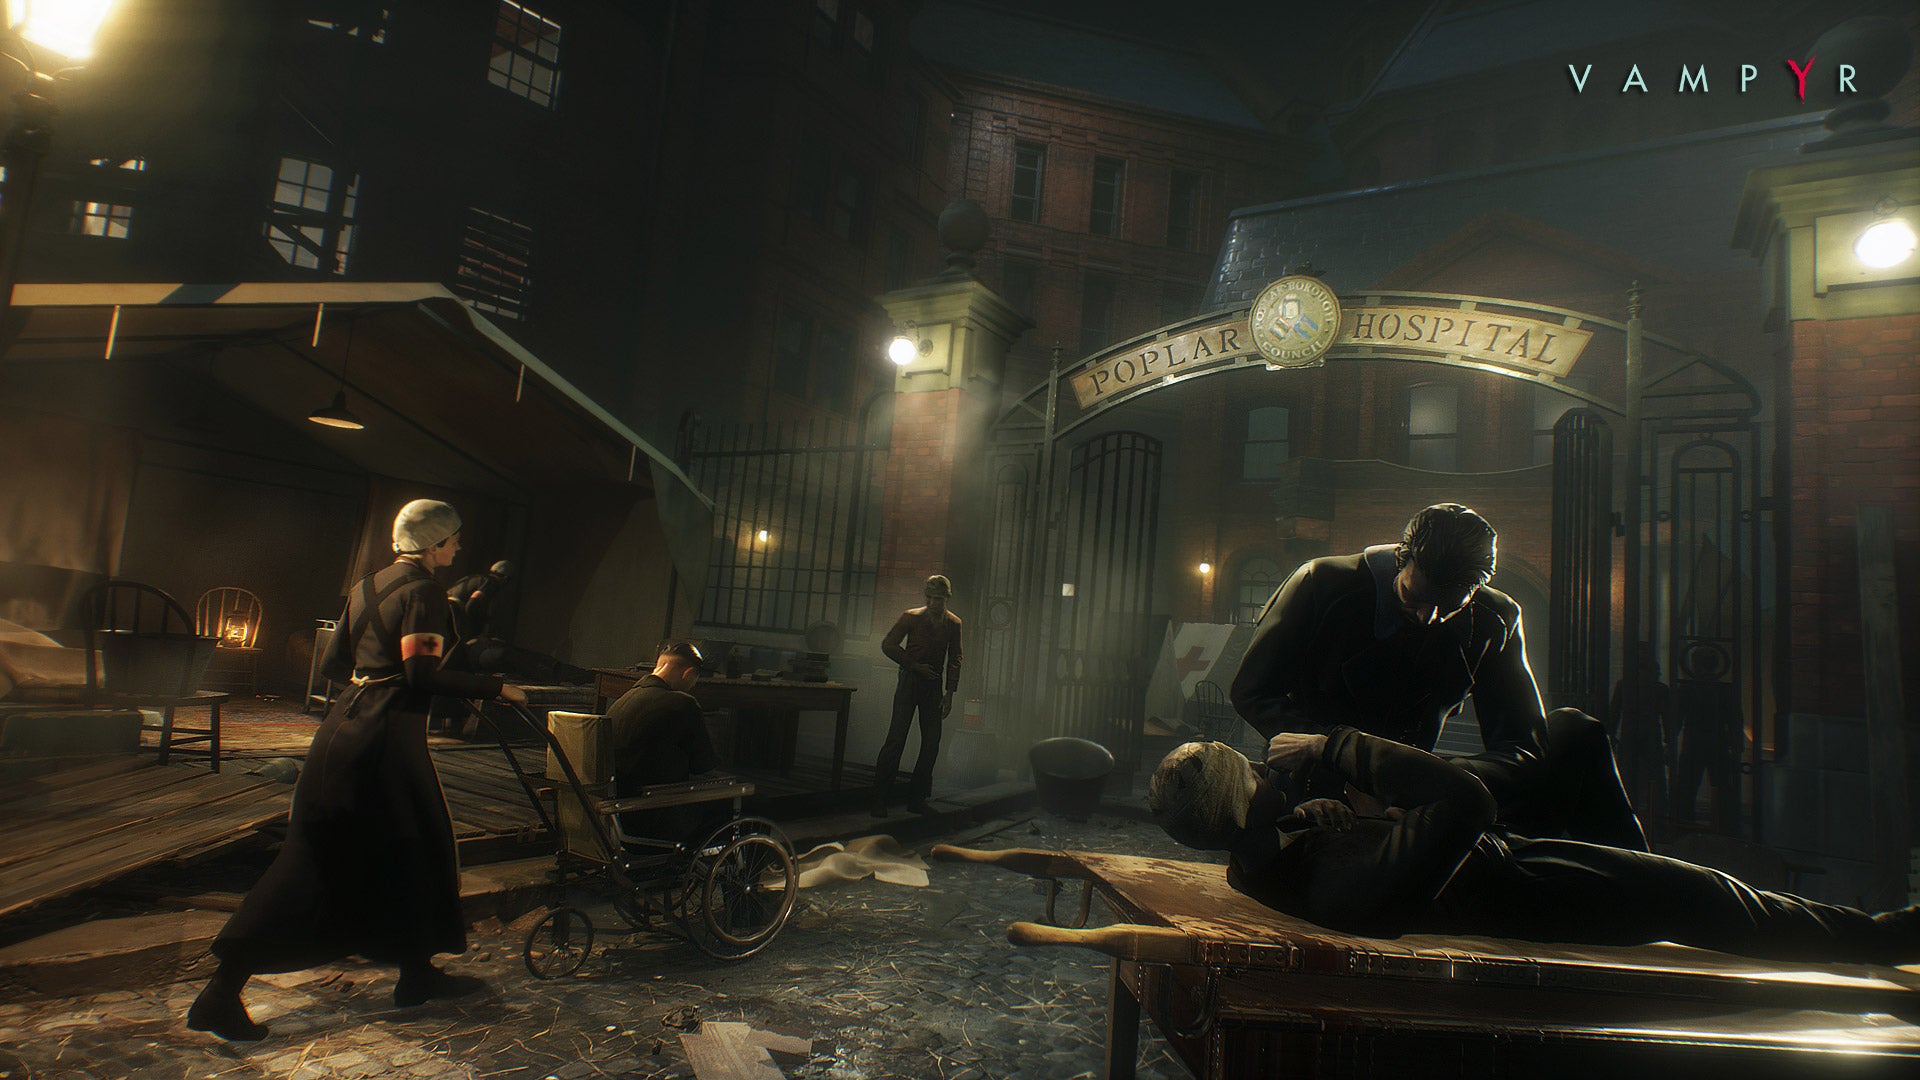 Image for E3 2016 trailer for Dontnod's Vampyr leaks ahead of the show [UPDATE]